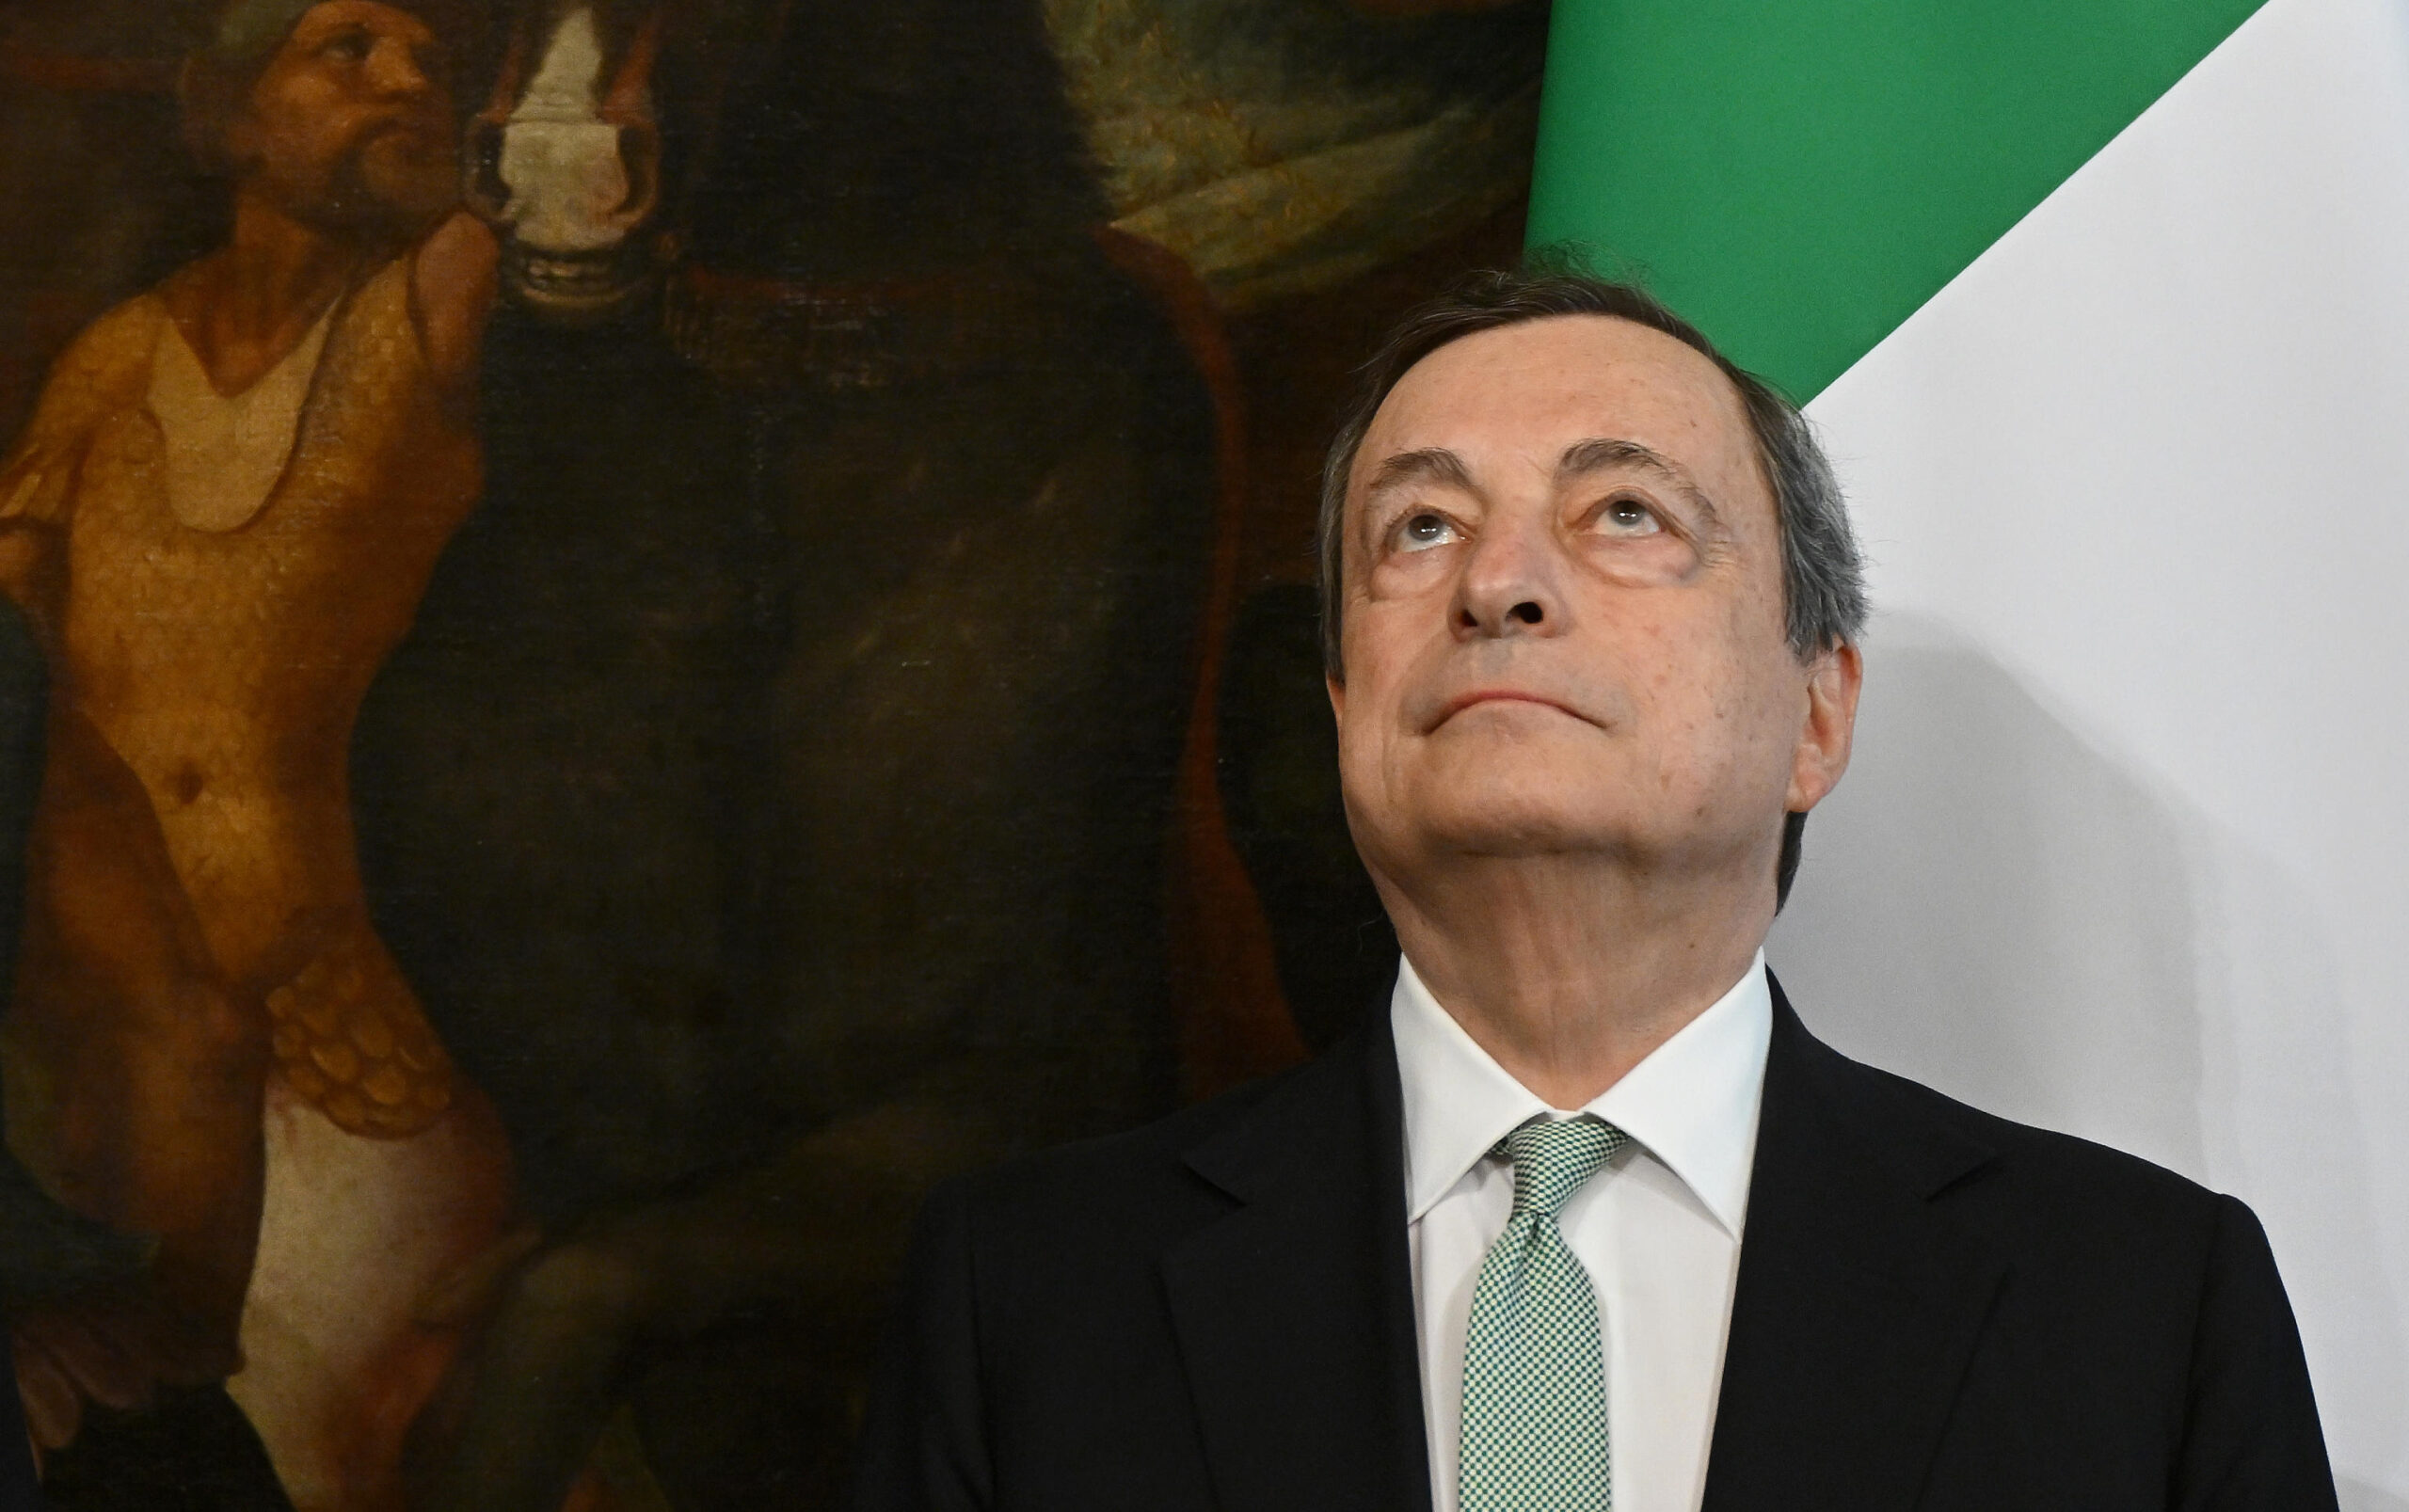 Italian Prime Minister Mario Draghi looks on during signing of a memorandum of understanding after a meeting with Algerian President at Chigi Palace in Rome, Italy, 26 May 2022.  ANSA/ETTORE FERRARI